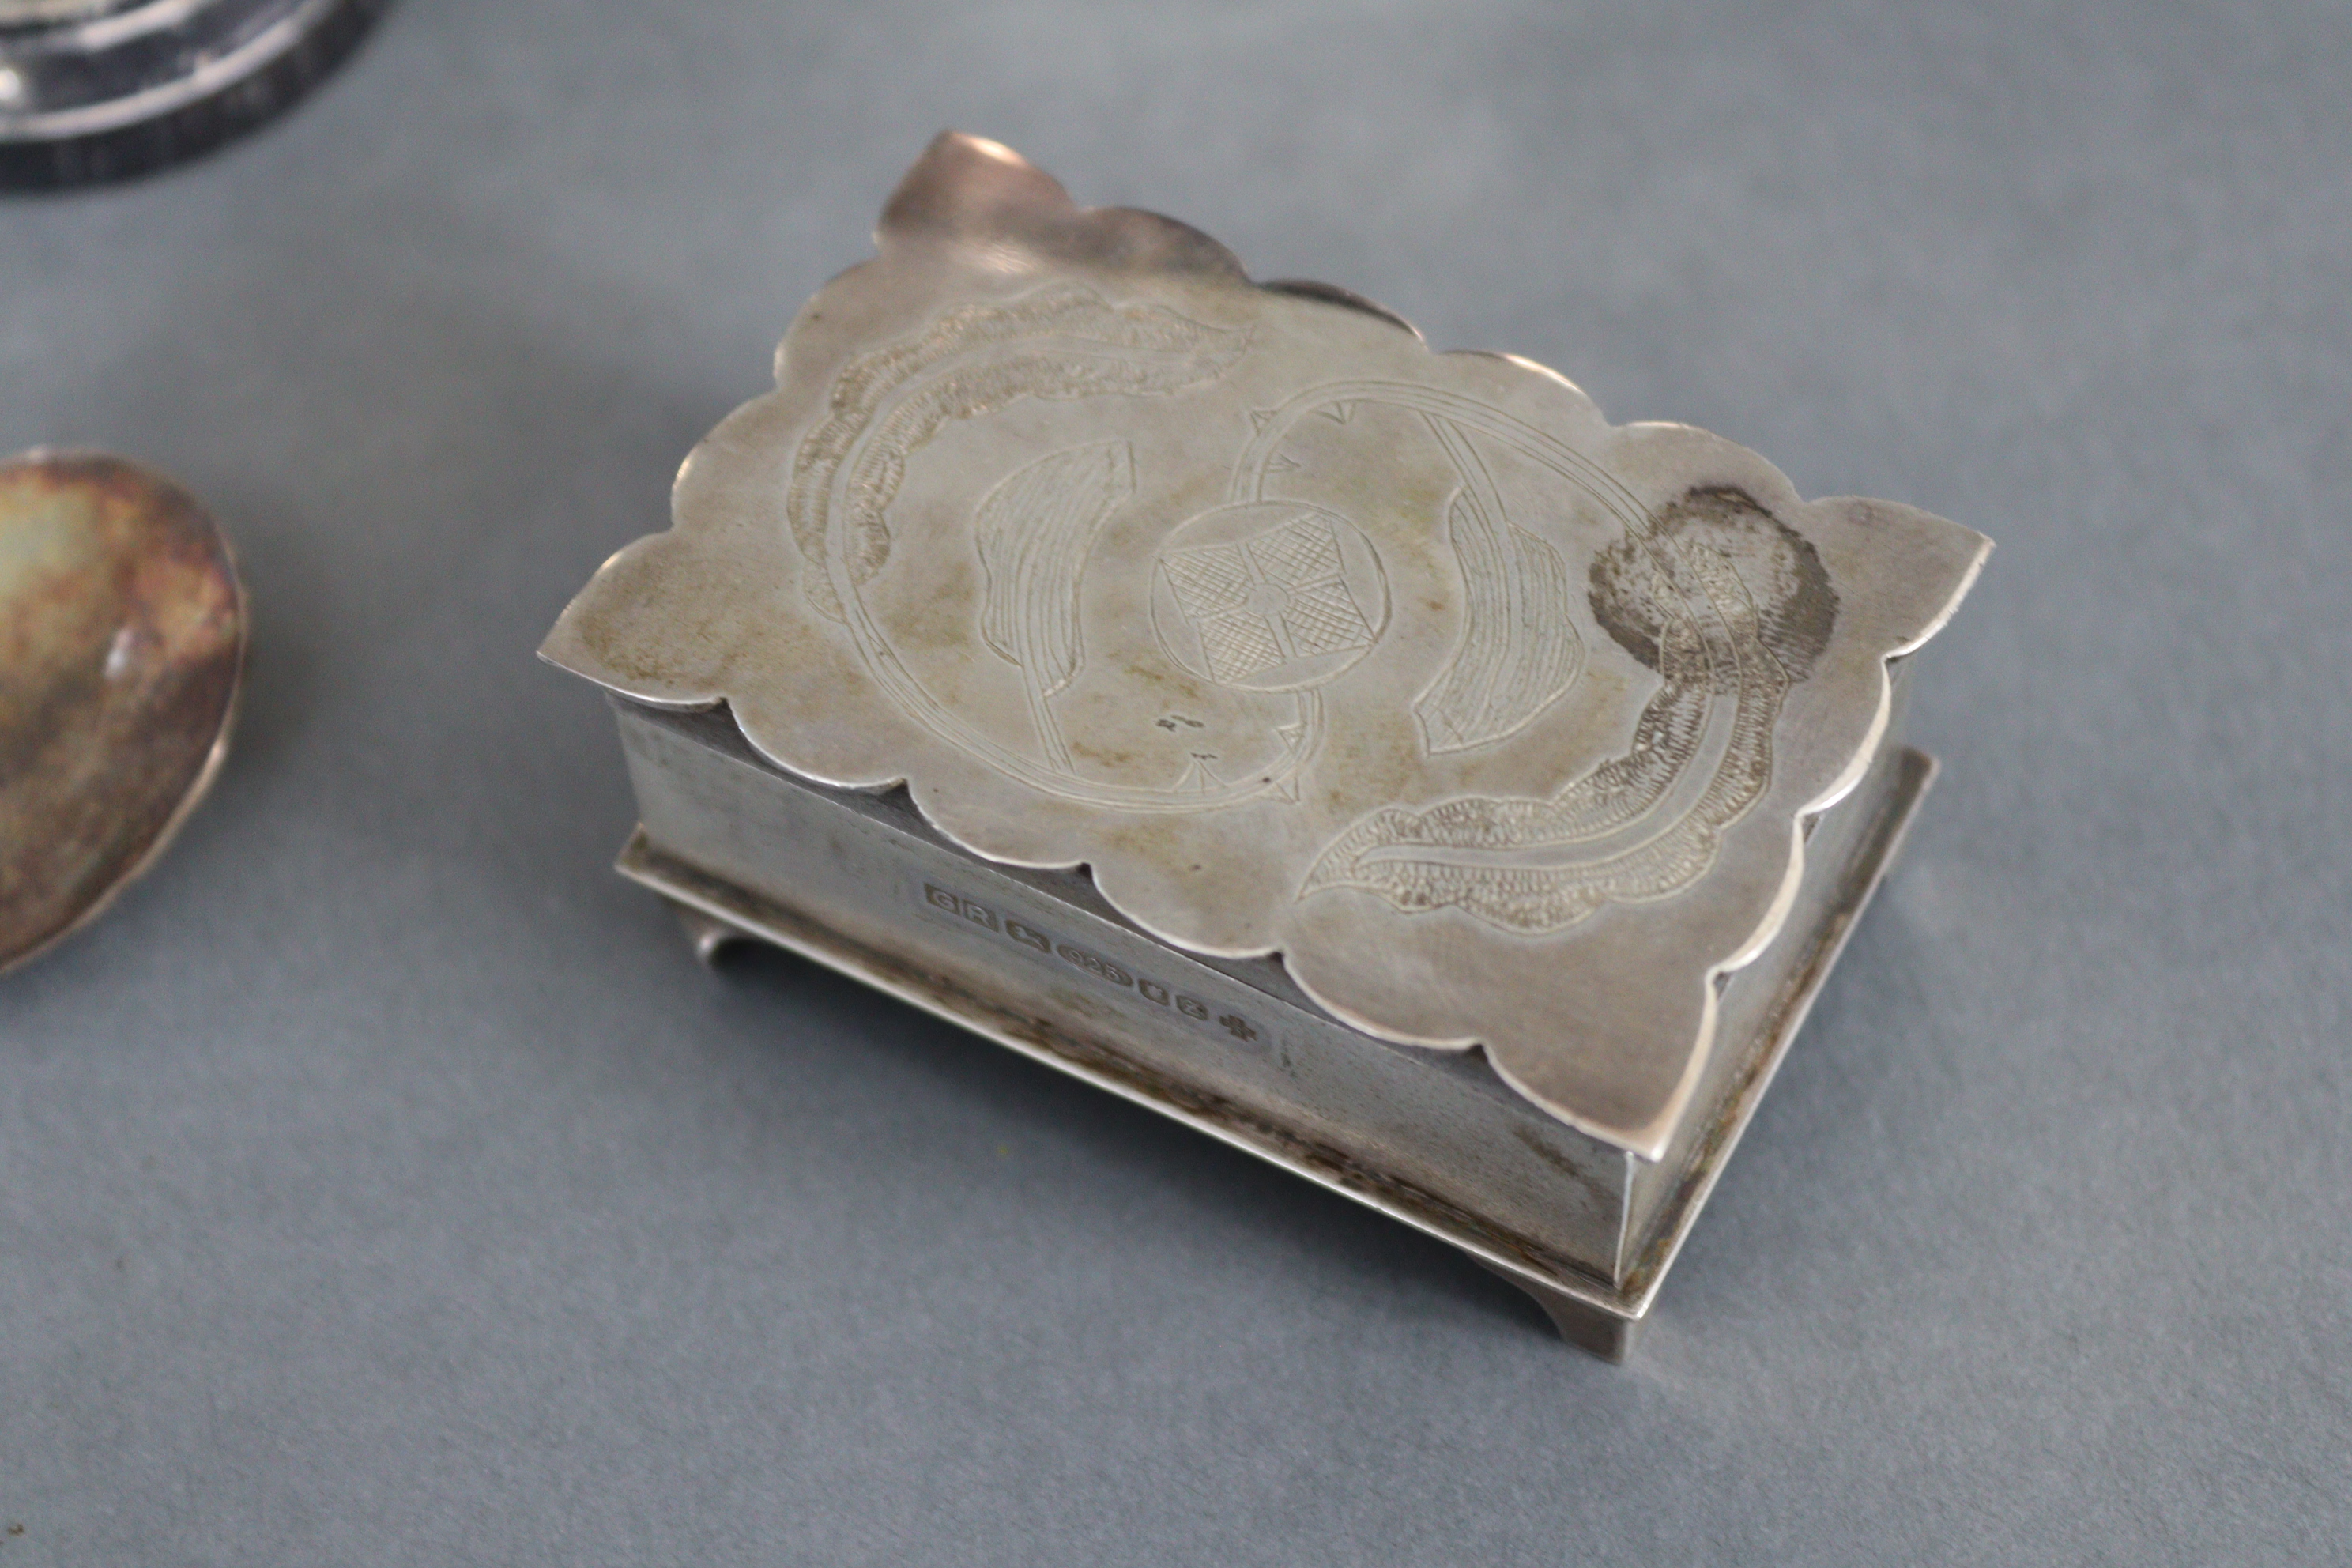 A collection of modern silver items, all made by a “G. Reddyhoff”, comprising: a circular bowl - Image 8 of 20